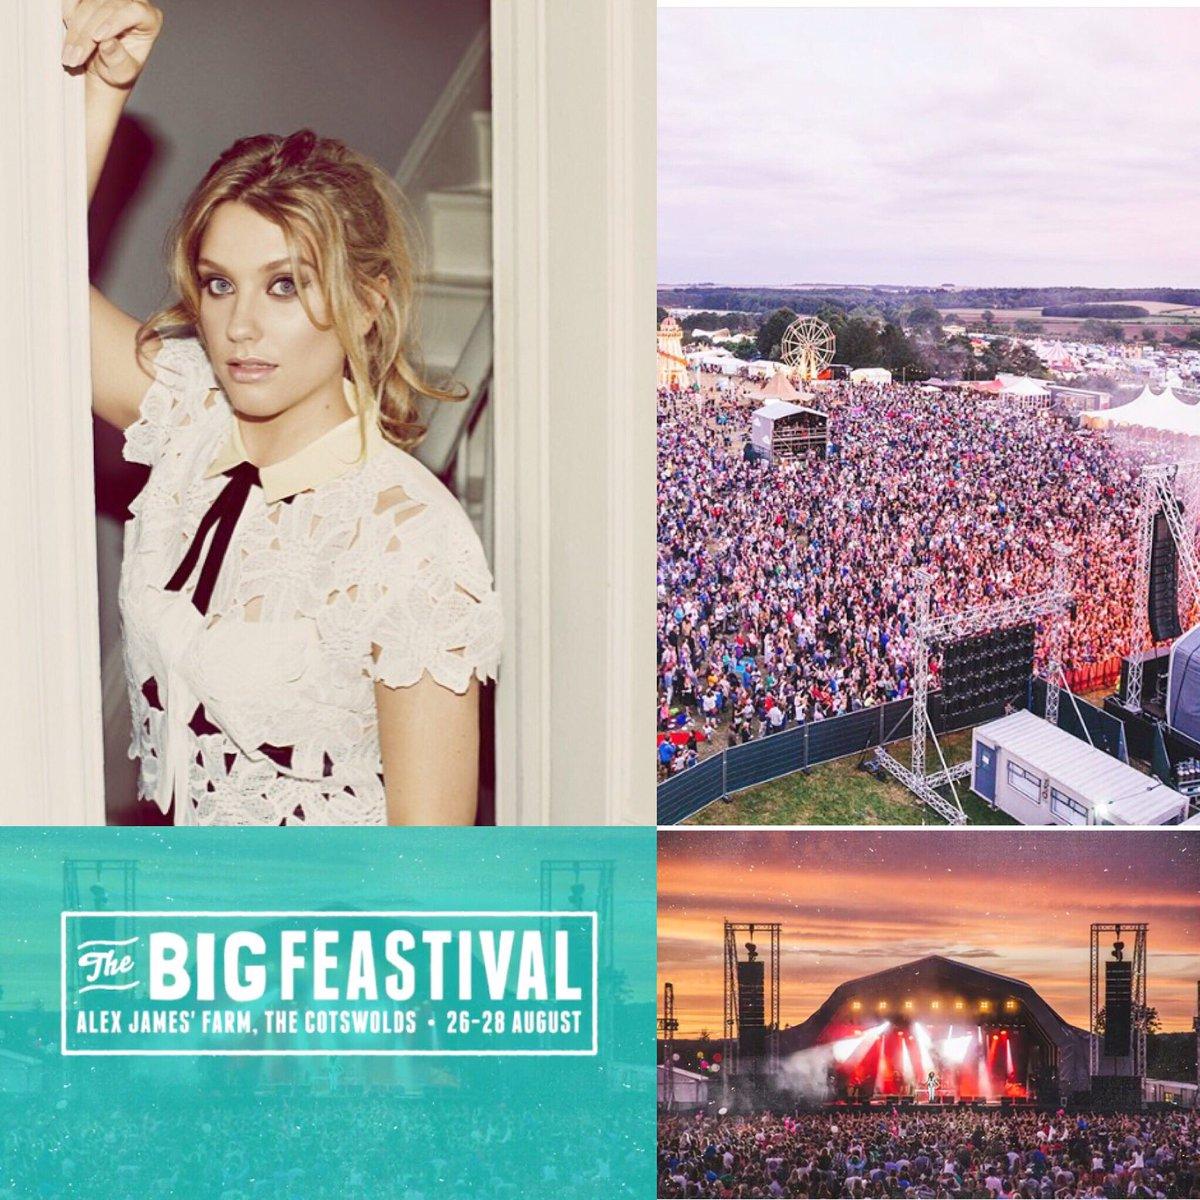 Singer-songwriter Ella Henderson has been spotted at the Big Feastival and posted this picture earlier in the weekend. She wrote: Who's coming to @thebigfeastival tomorrow!! So excited to see you all there !! 🎉🙌🏼🙌🏼💛. X.  E. Picture: Twit